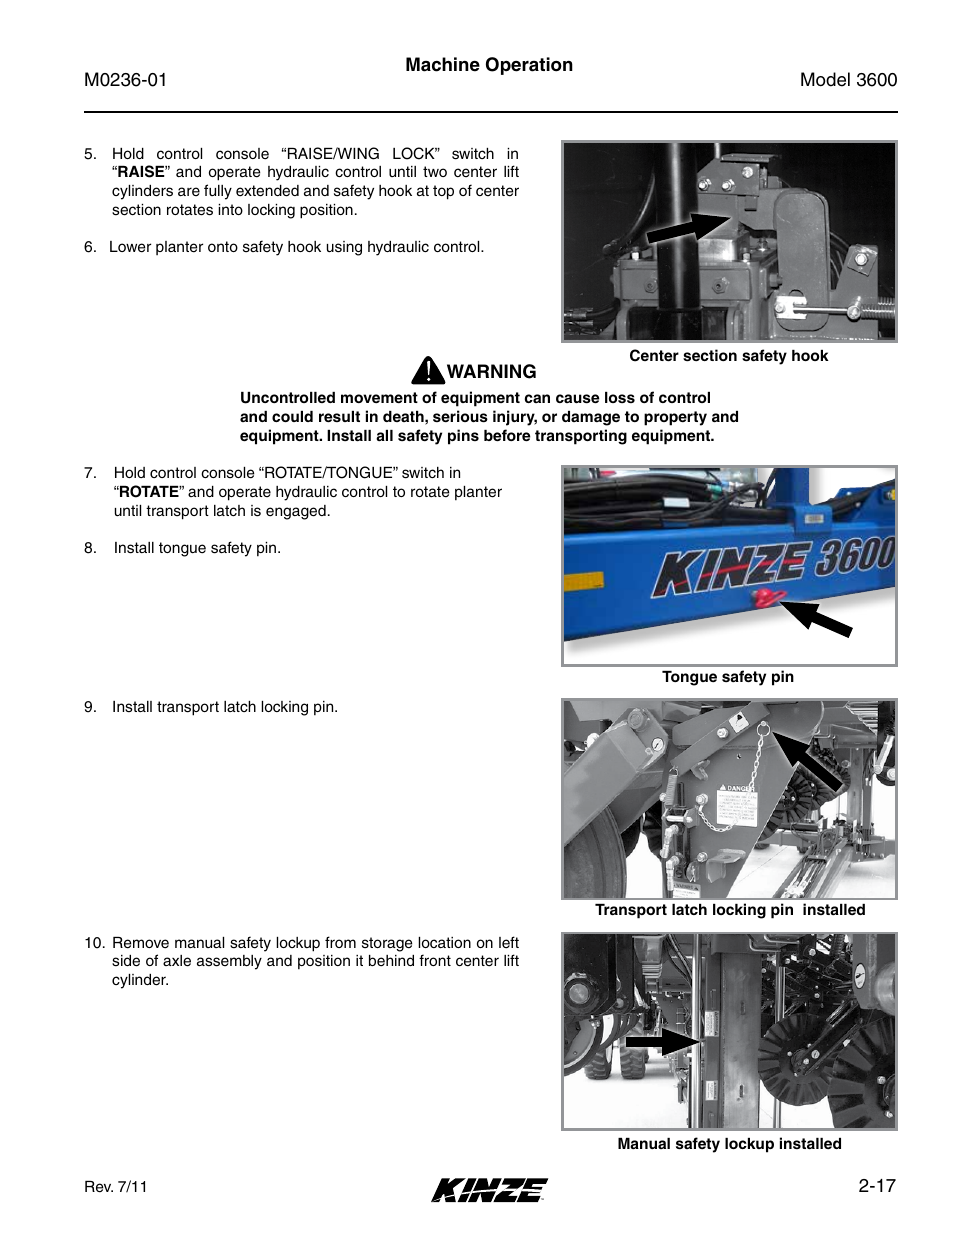 Kinze 3600 Lift and Rotate Planter Rev. 7/14 User Manual | Page 27 / 172